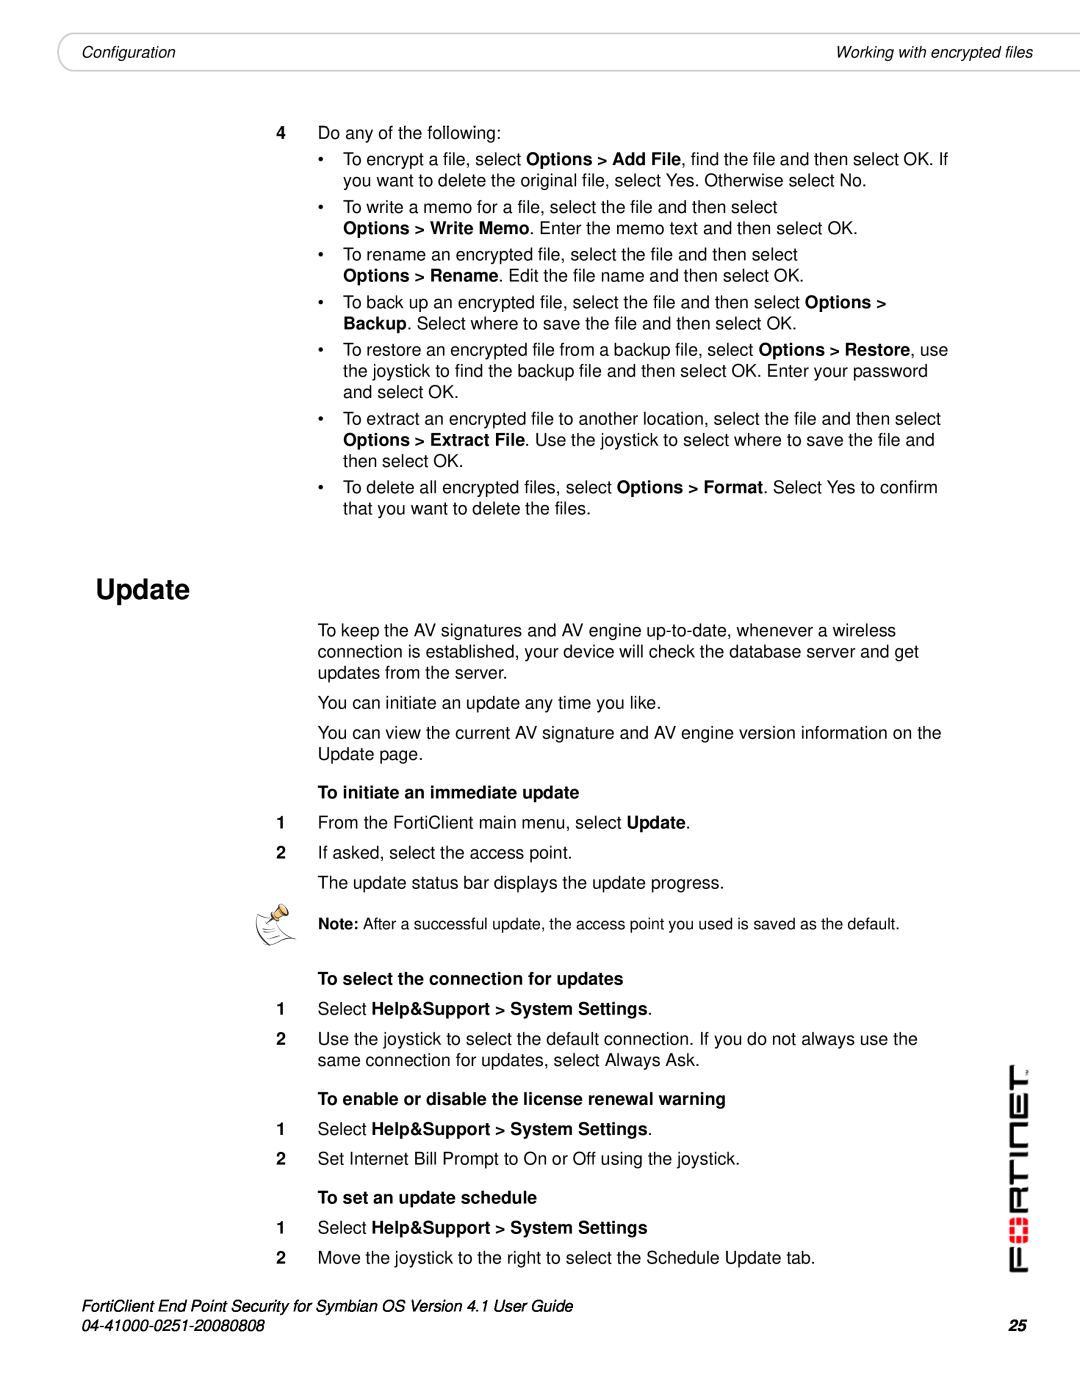 Fortinet Version 4.1 manual Update, To initiate an immediate update, To select the connection for updates 